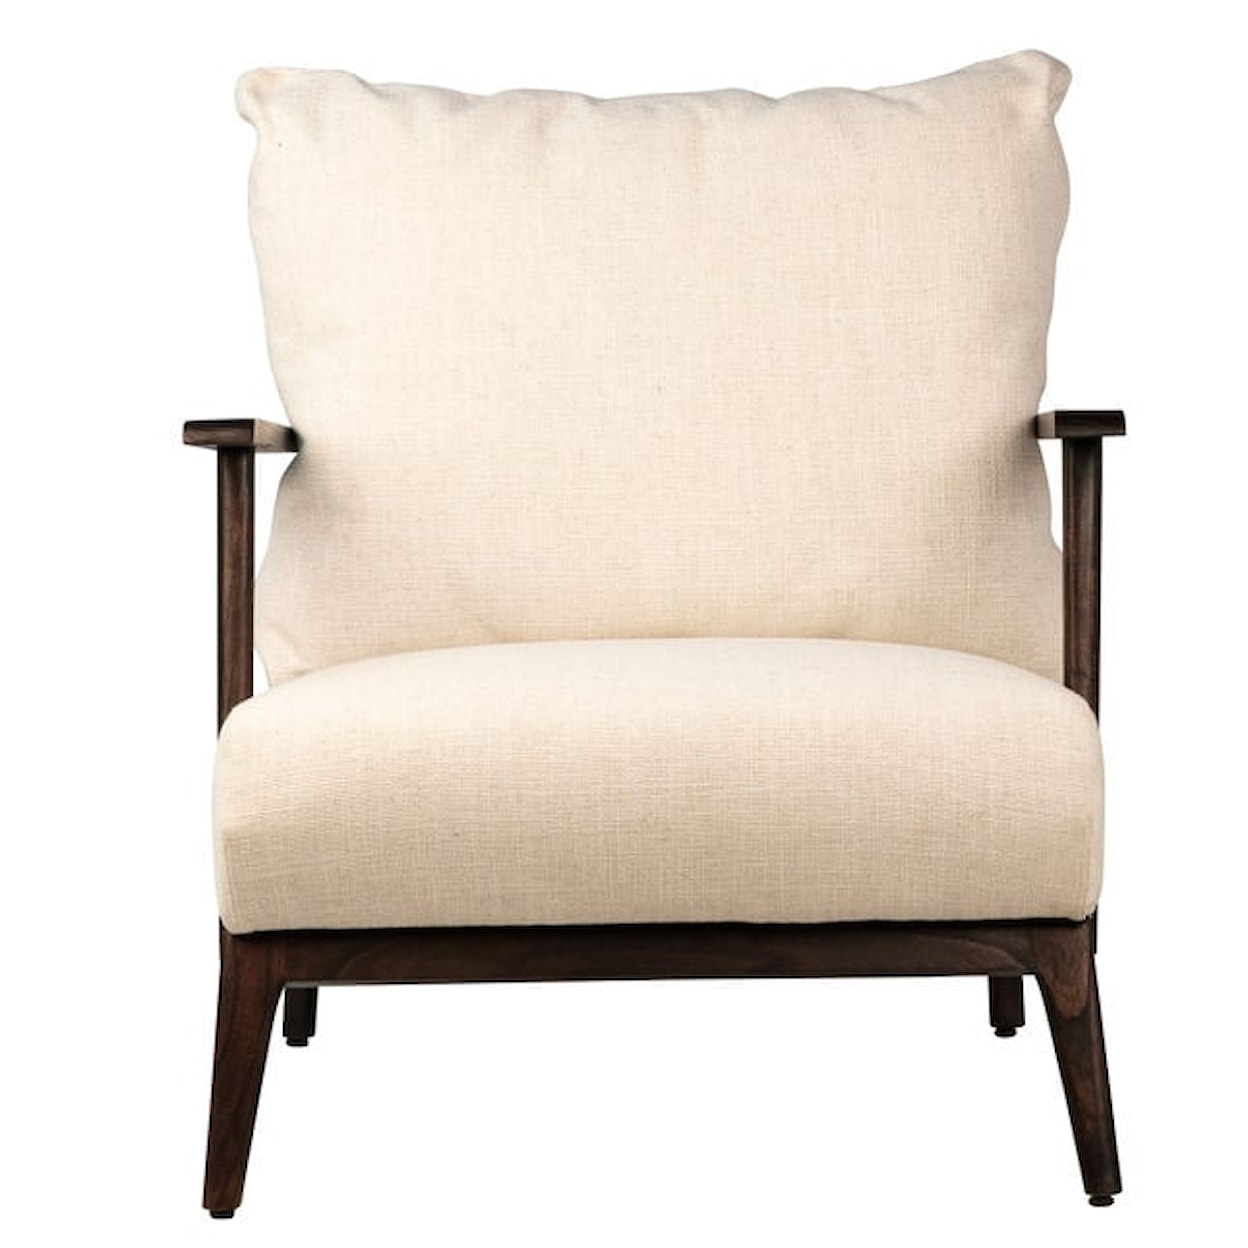 Dovetail Furniture Upholstery Vasquez Occasional Chair